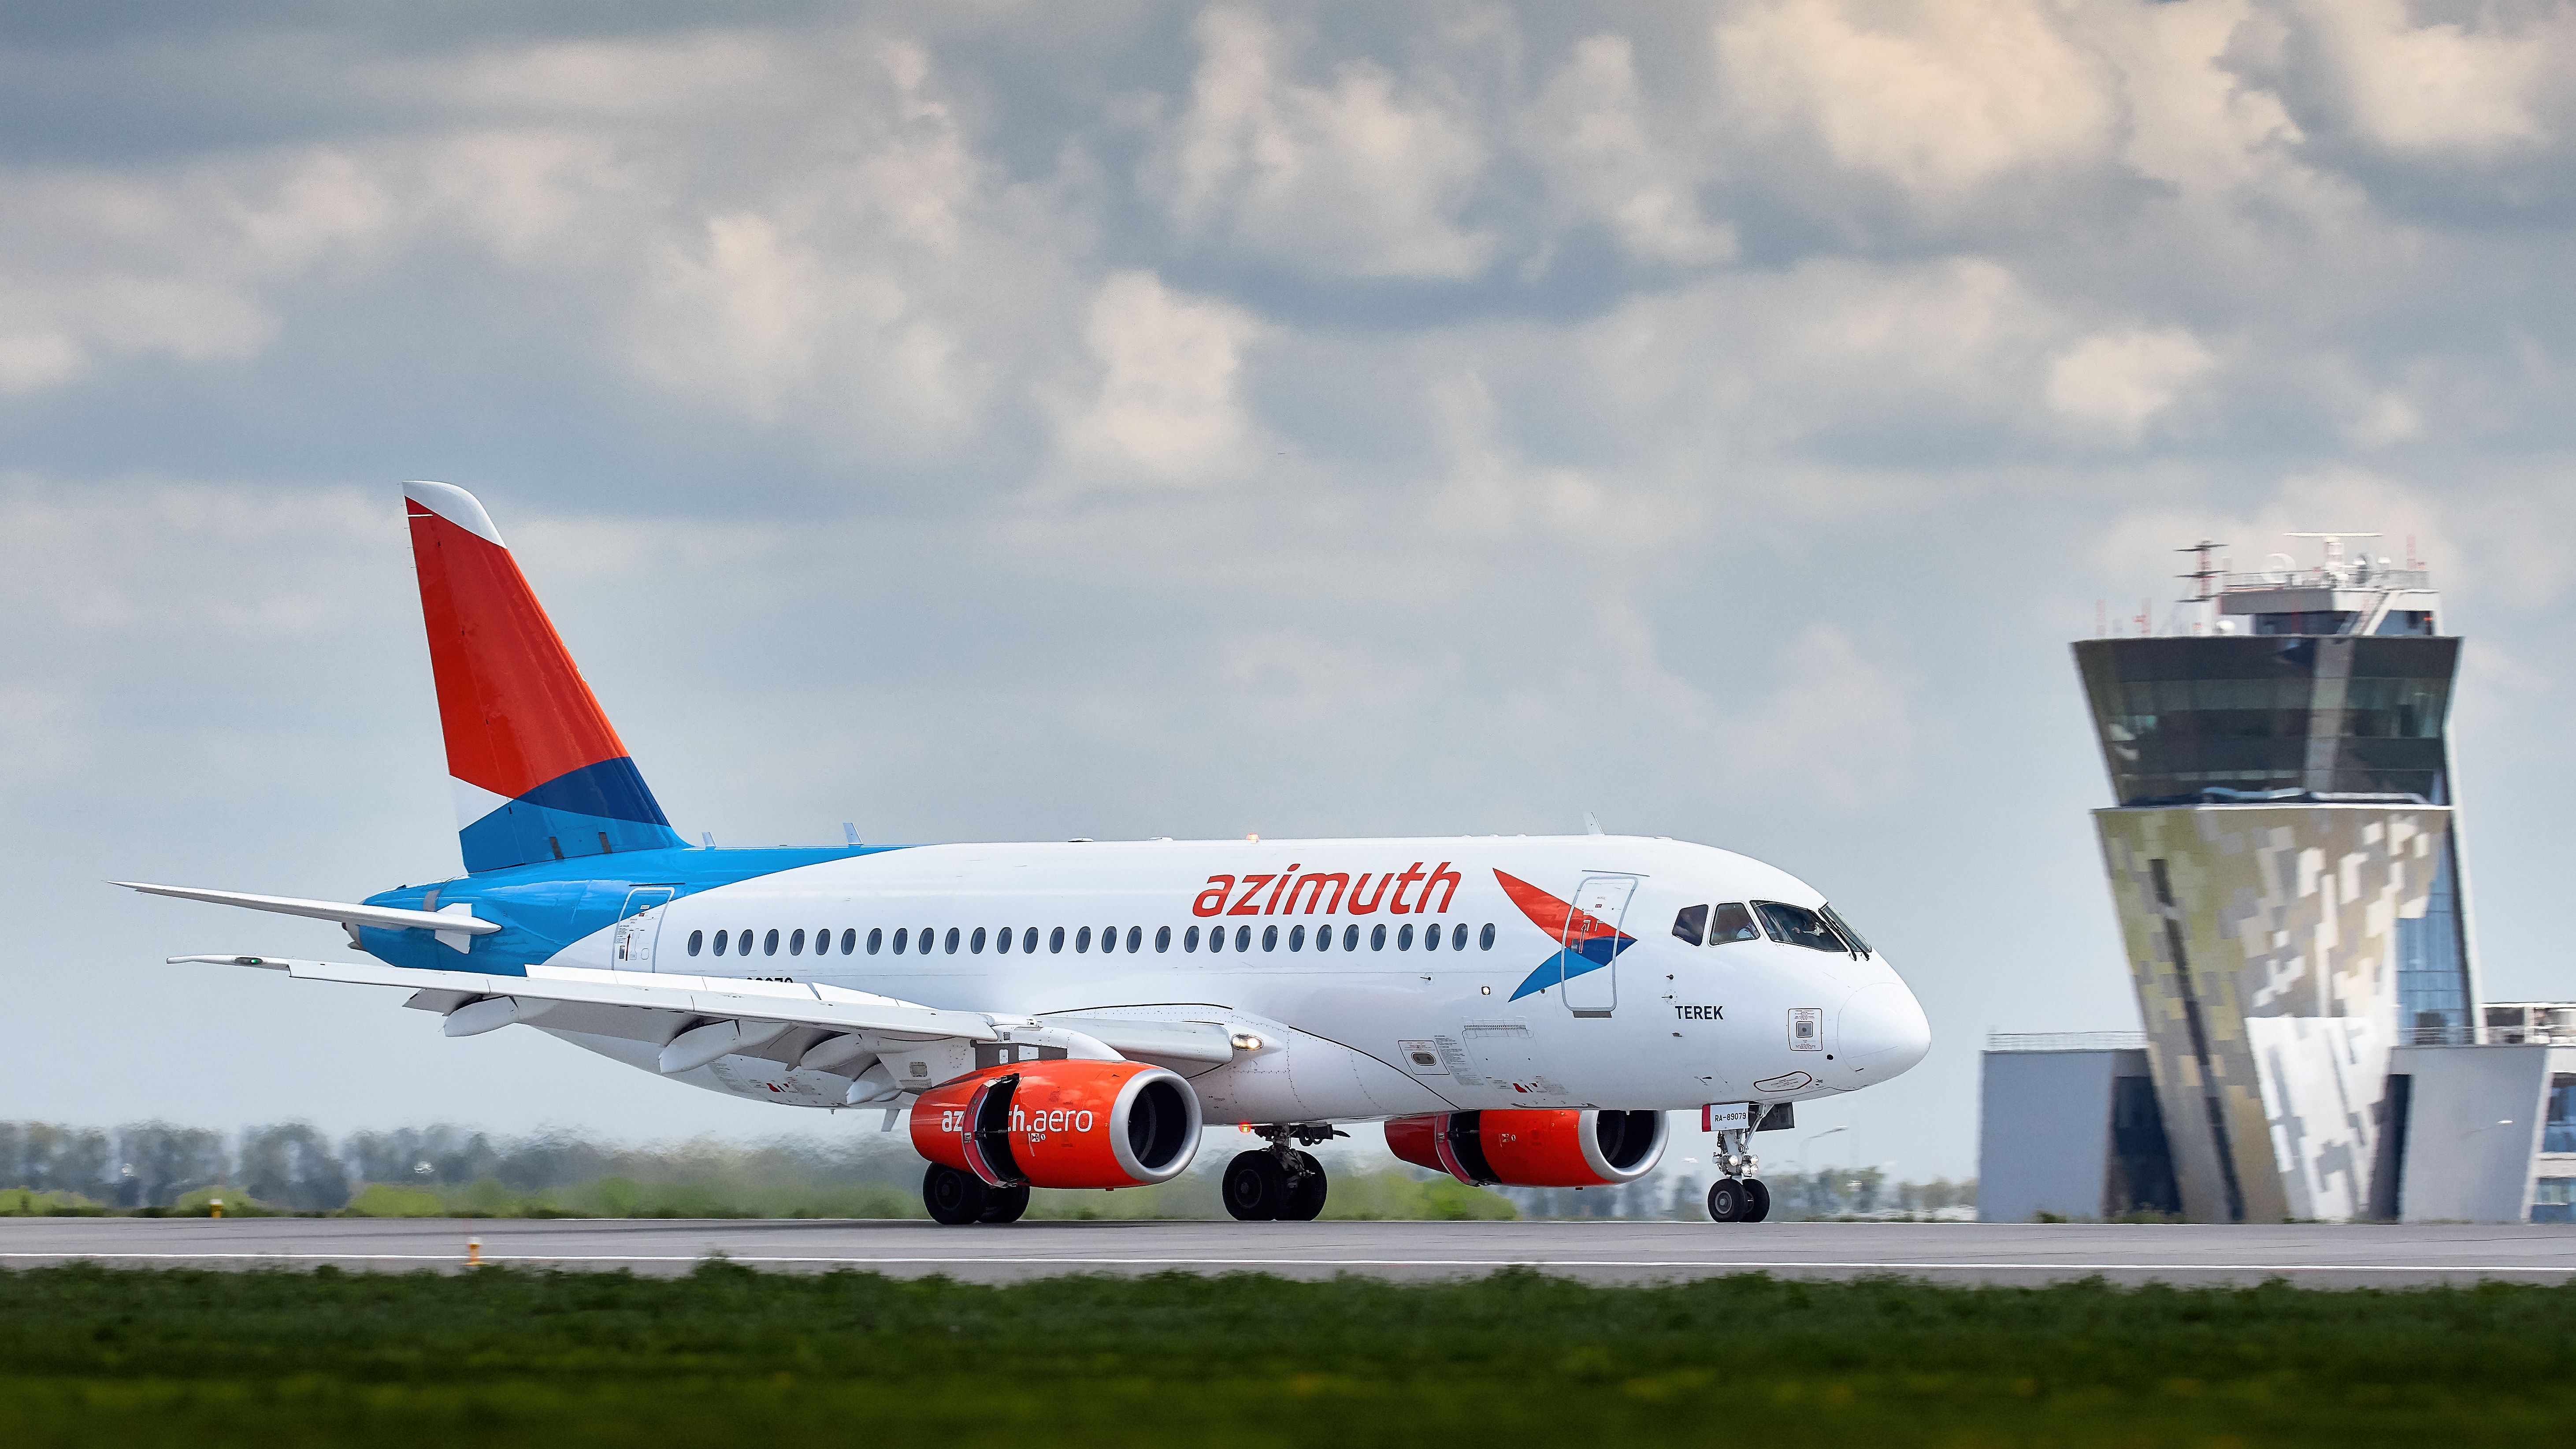 Aircraft Sukhoi Superjet 100 RA-89079 of Azimuth Airlines performs landing at the airport Platov. Spotting at the airport Platov. 24.05.2019 ROSTOV-ON-DON, RUSSIA.